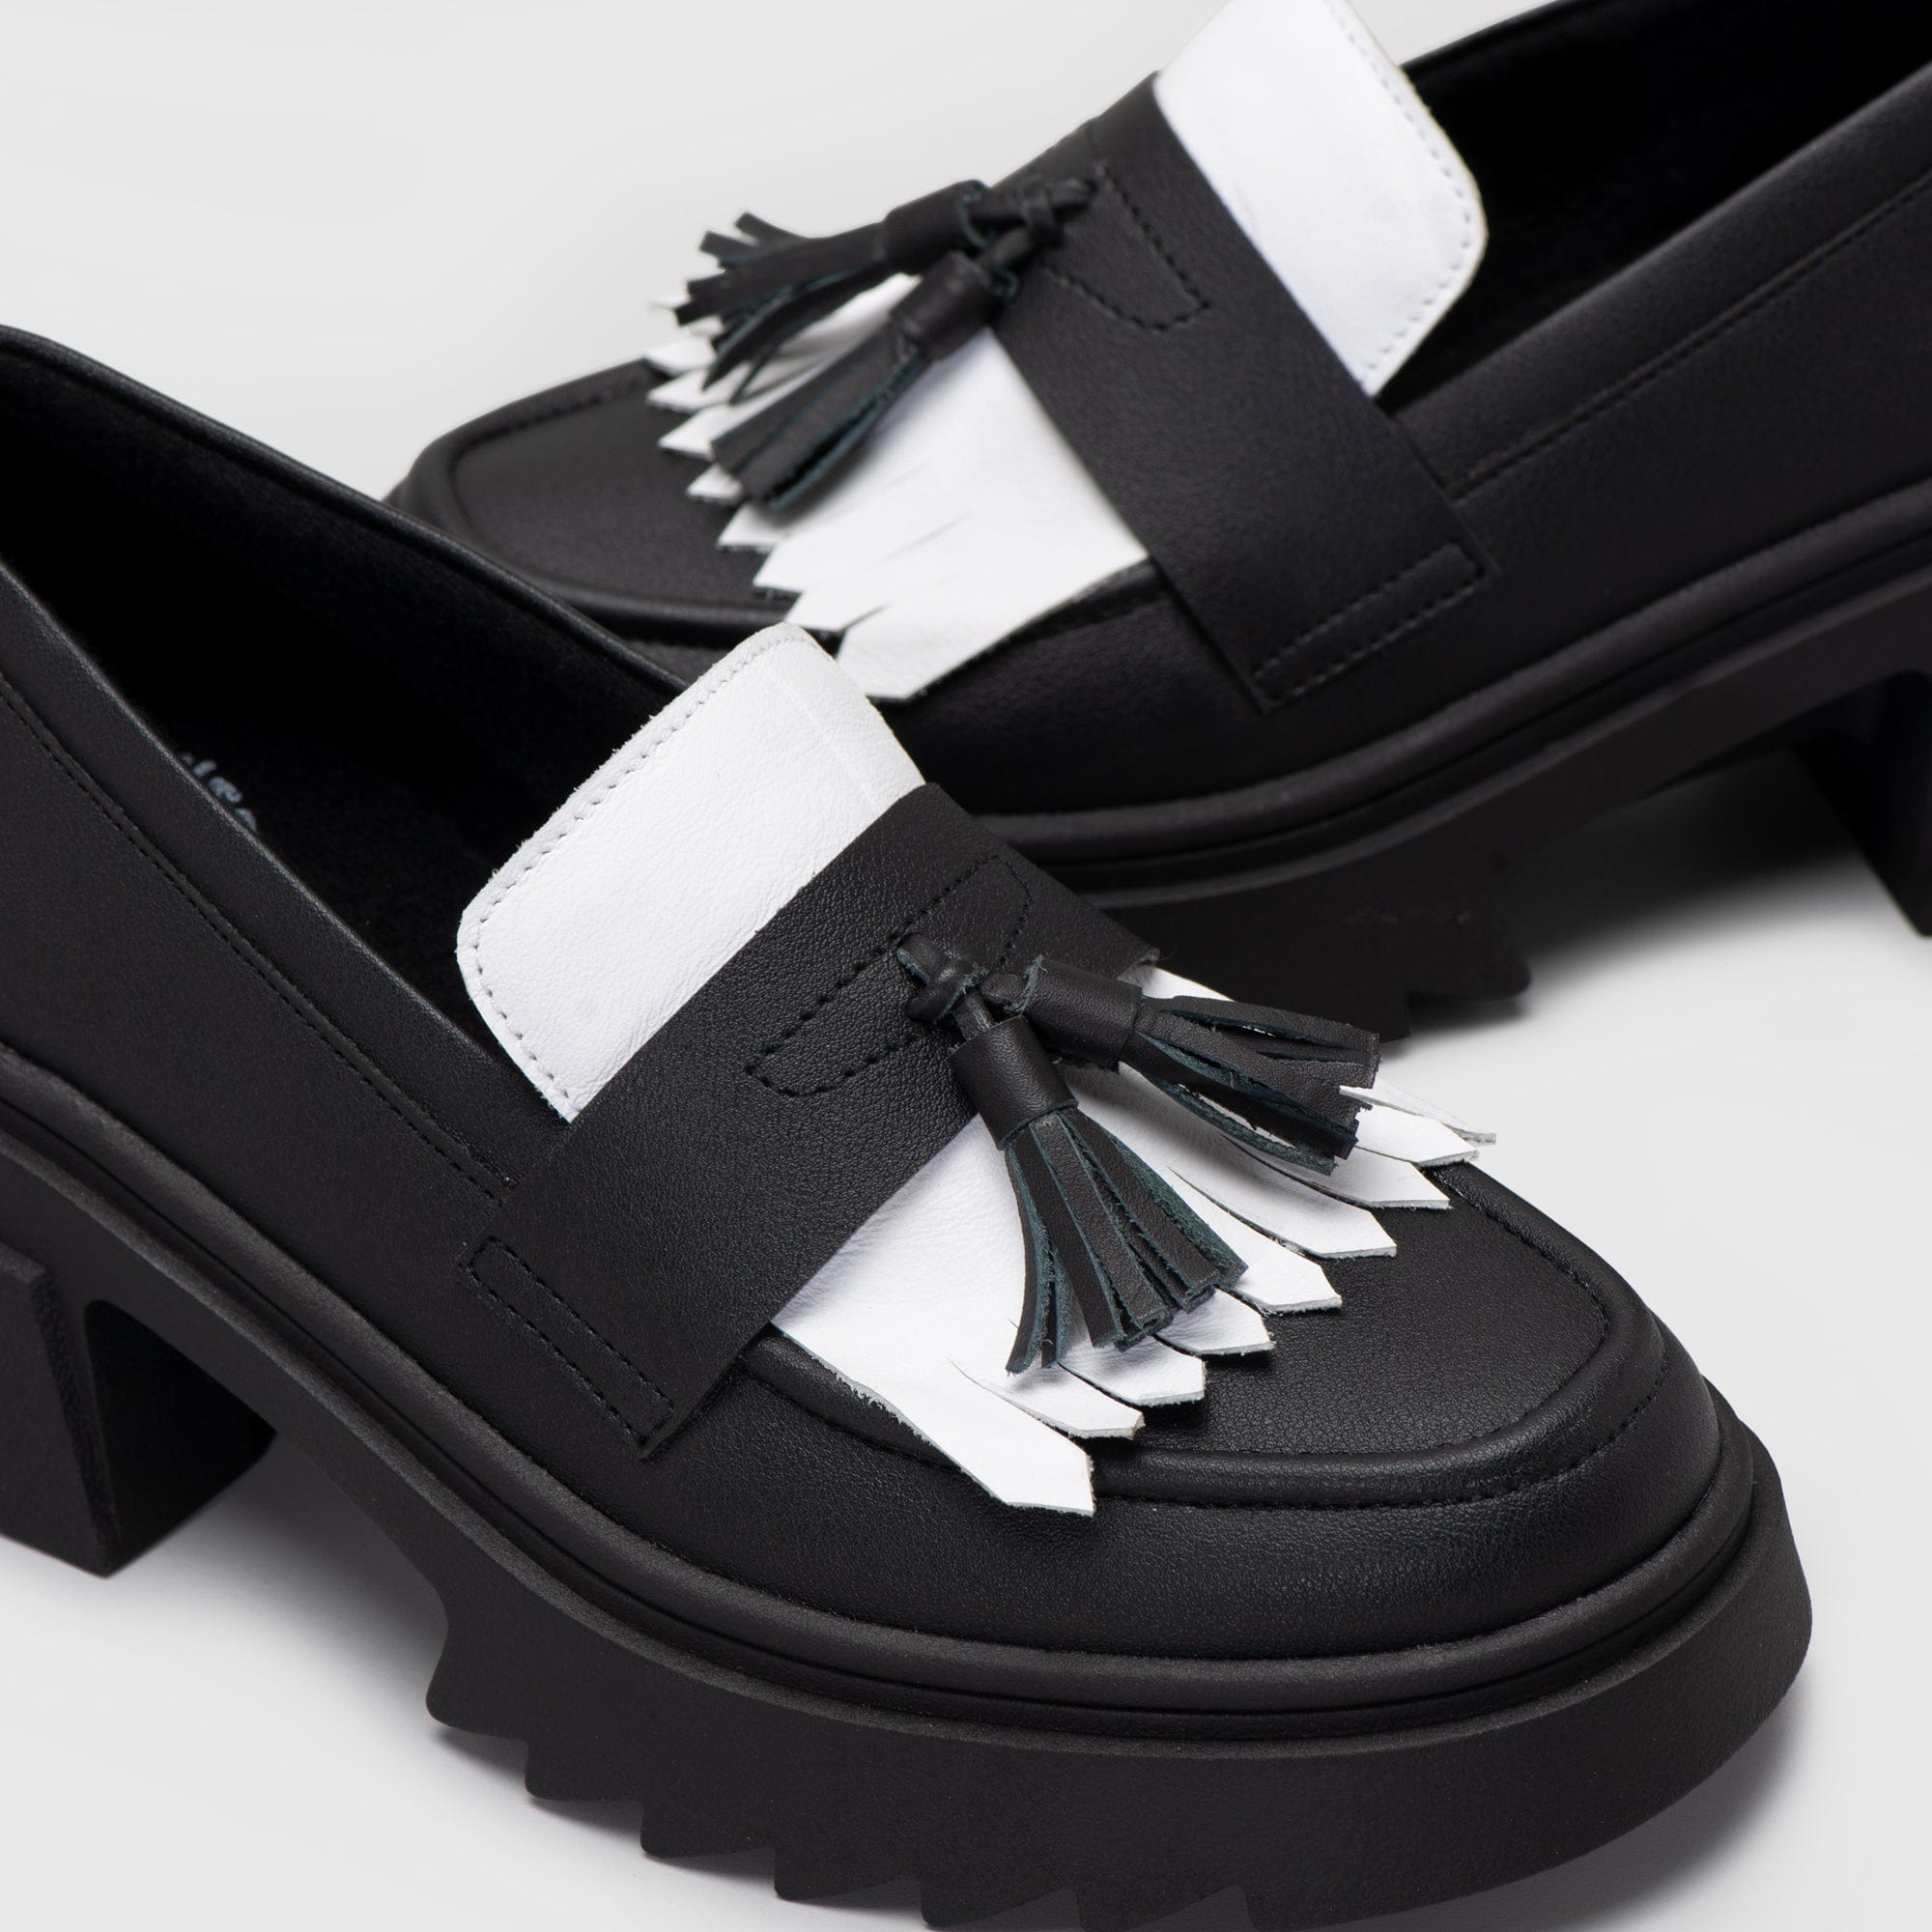 Adorable Projects Official Adorableprojects - Taralle Chunky Loafer BnW - Loafer Oxford